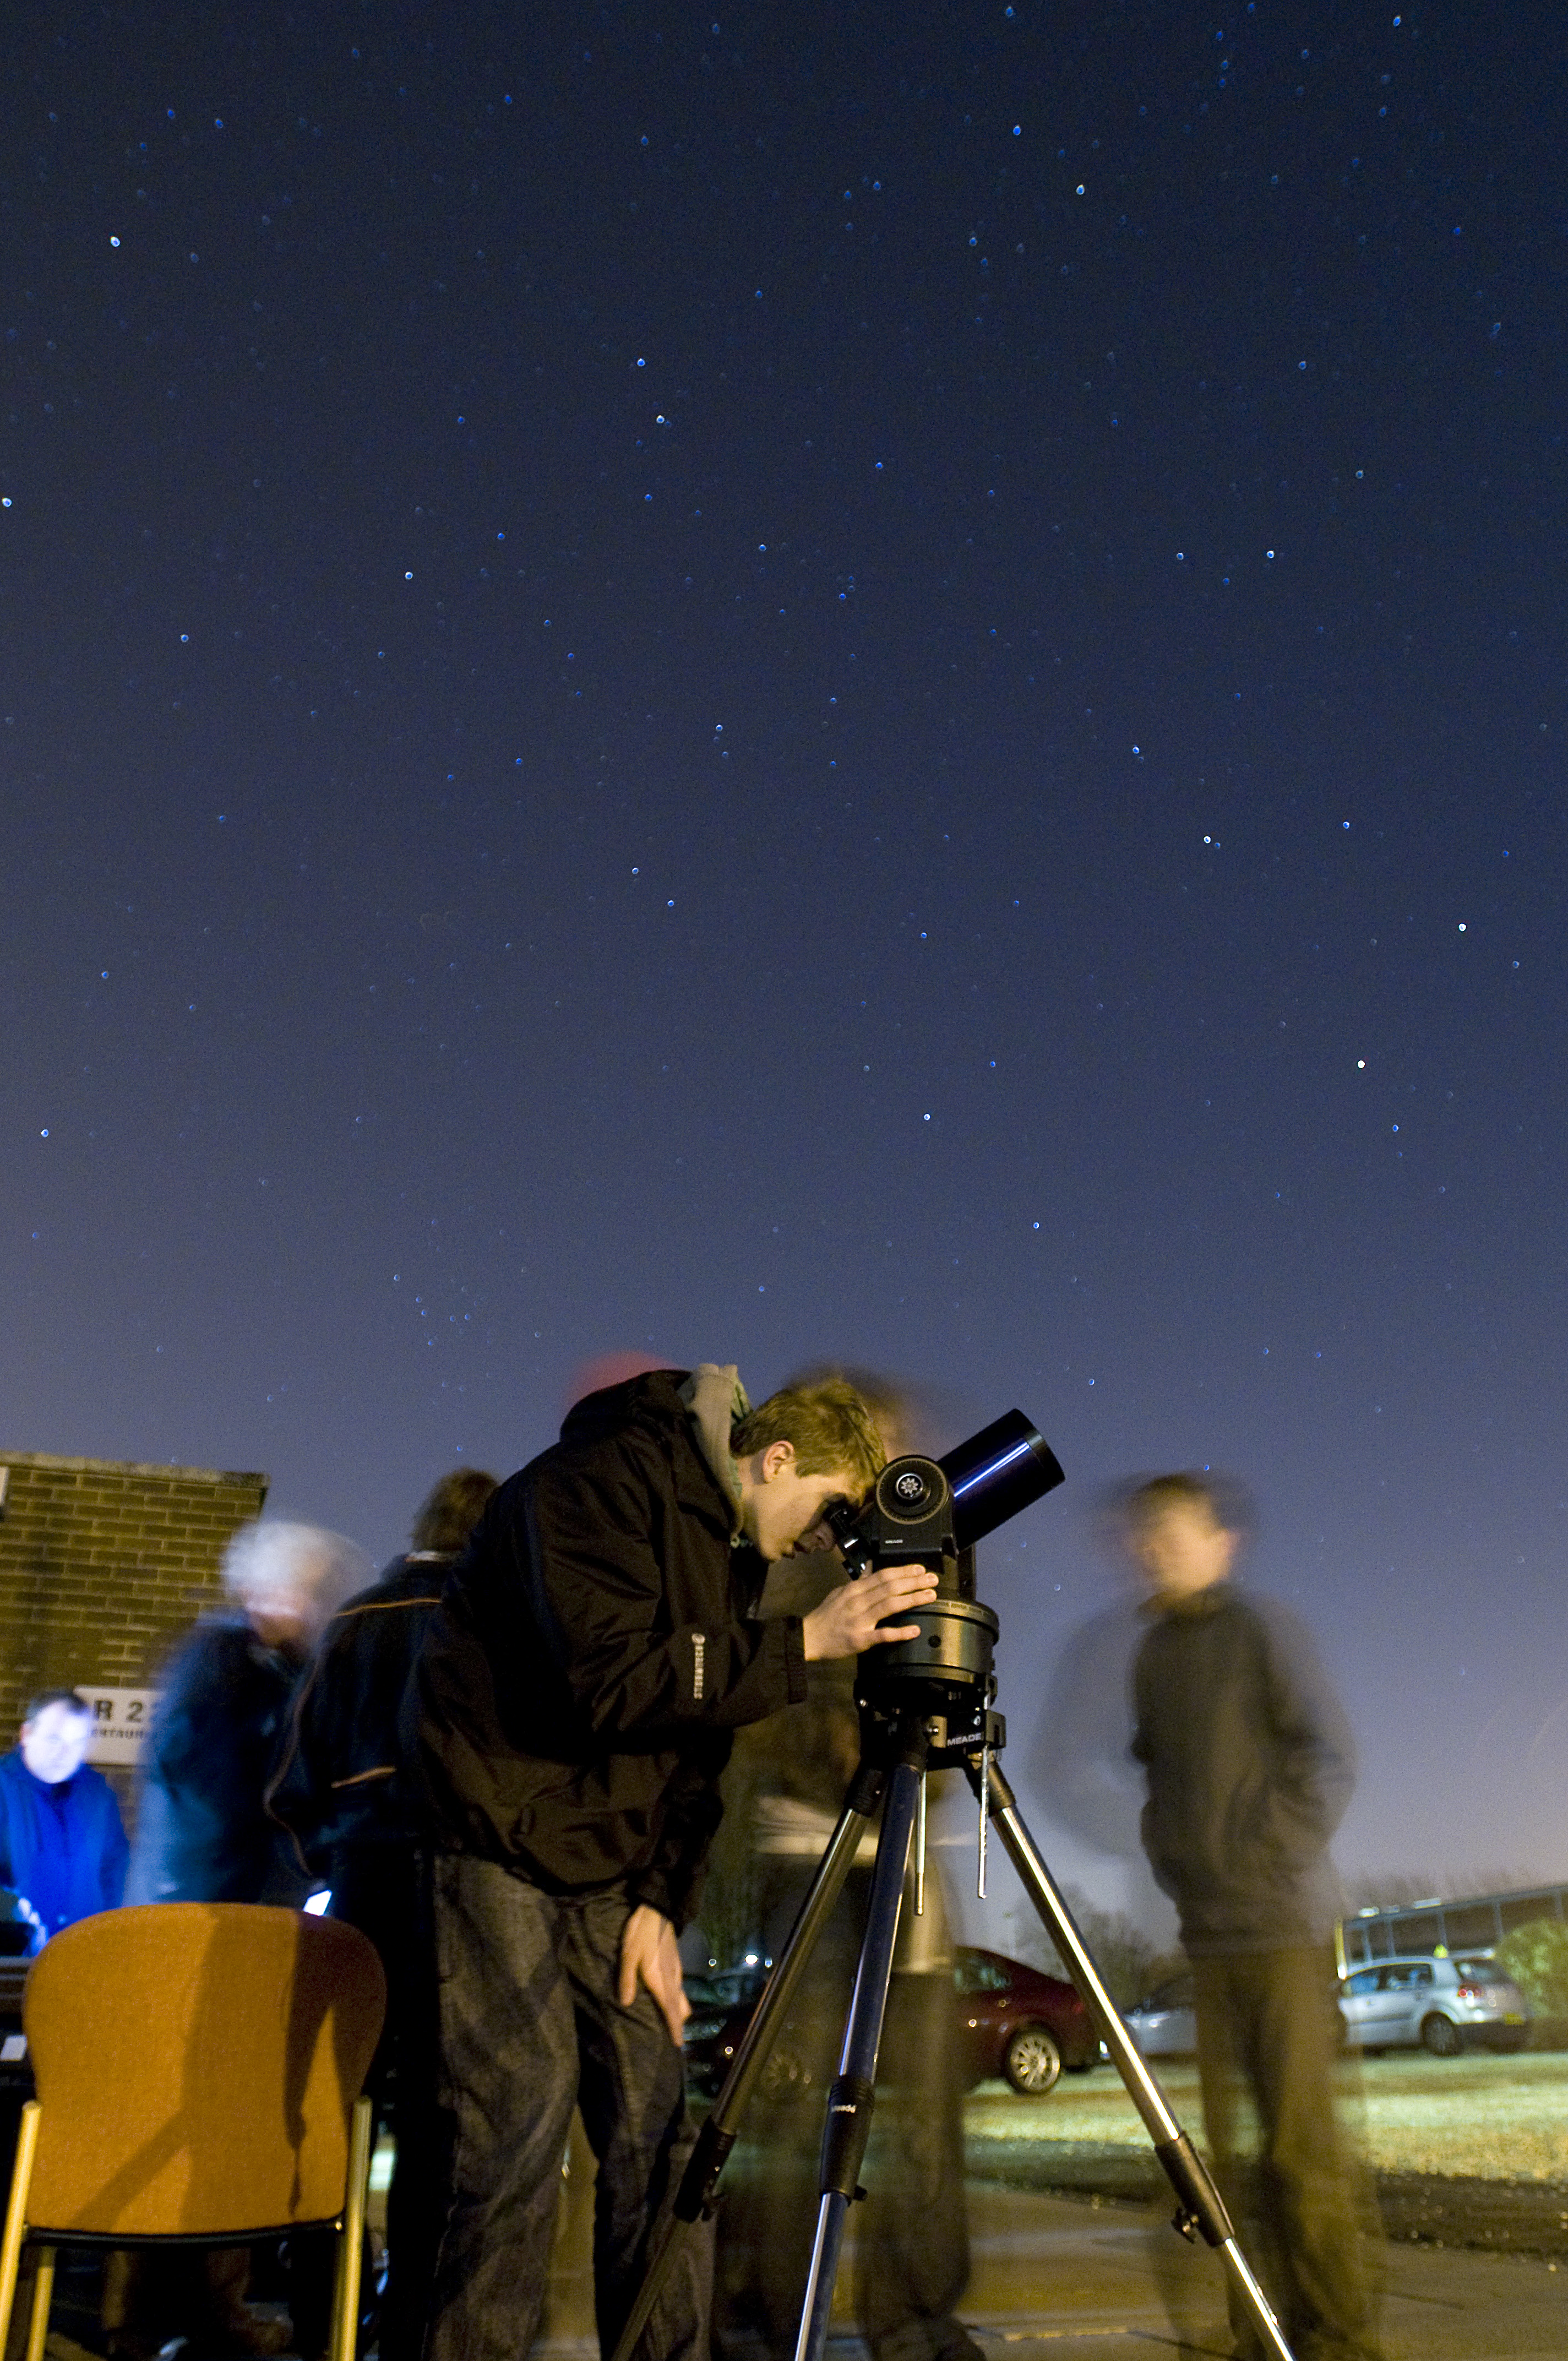 The public using telescopes at our stargazing event